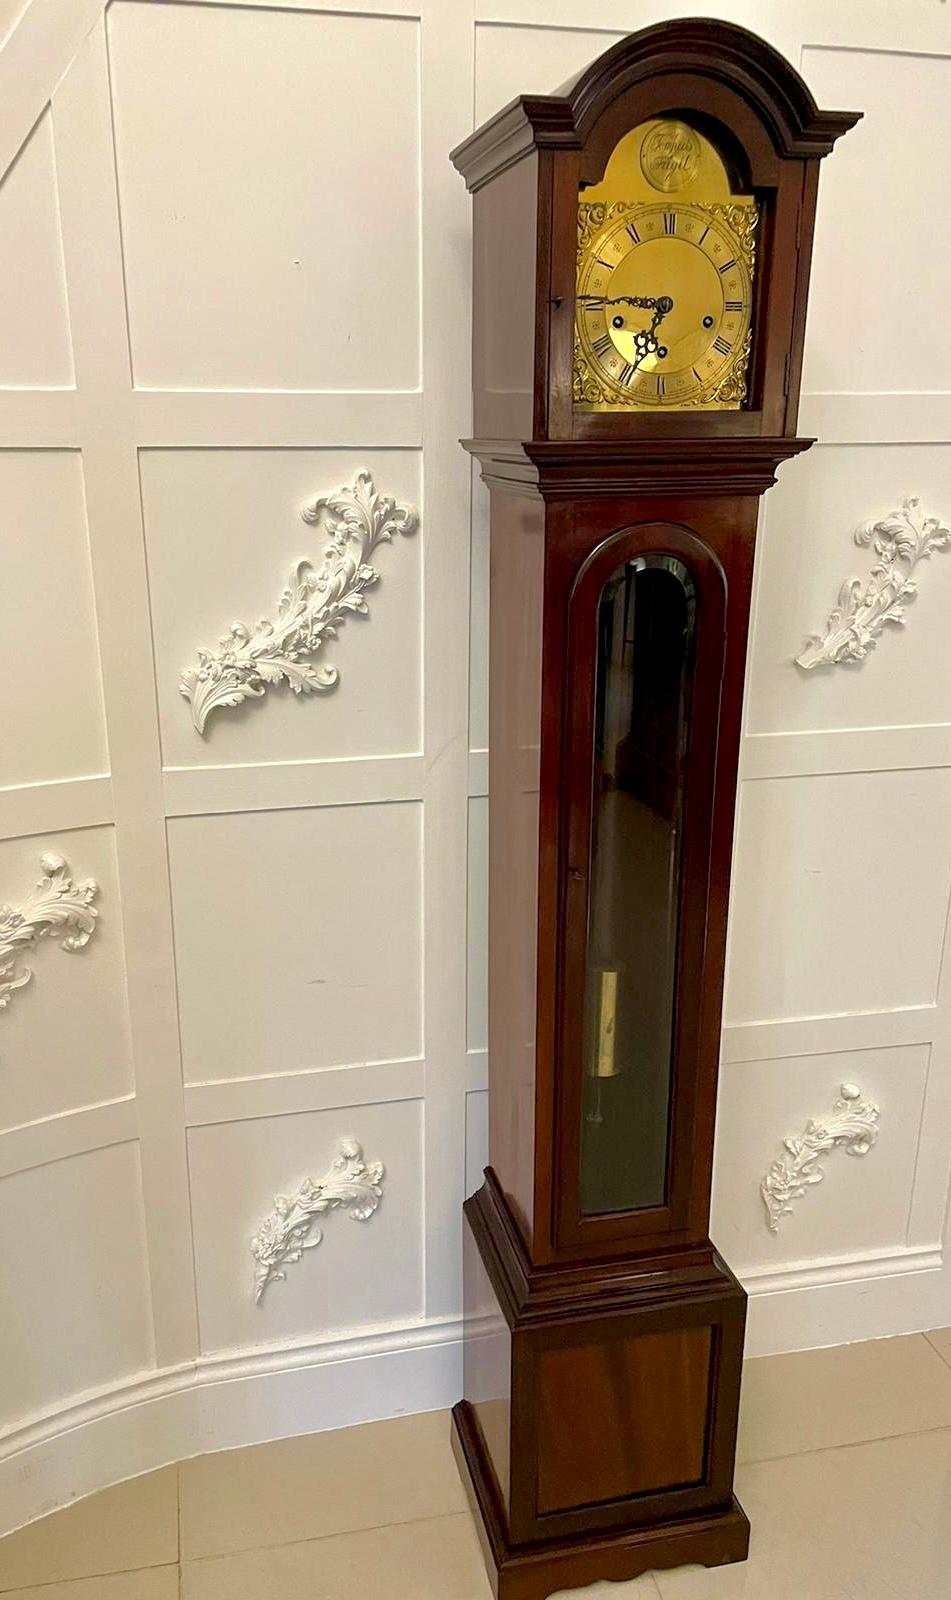 Outstanding quality antique mahogany 8 day chiming grandmother clock having an outstanding quality mahogany case with a long bevelled edge glass door, brass arched dial with original hands, 8 day movement chiming every 15 minutes and striking on the